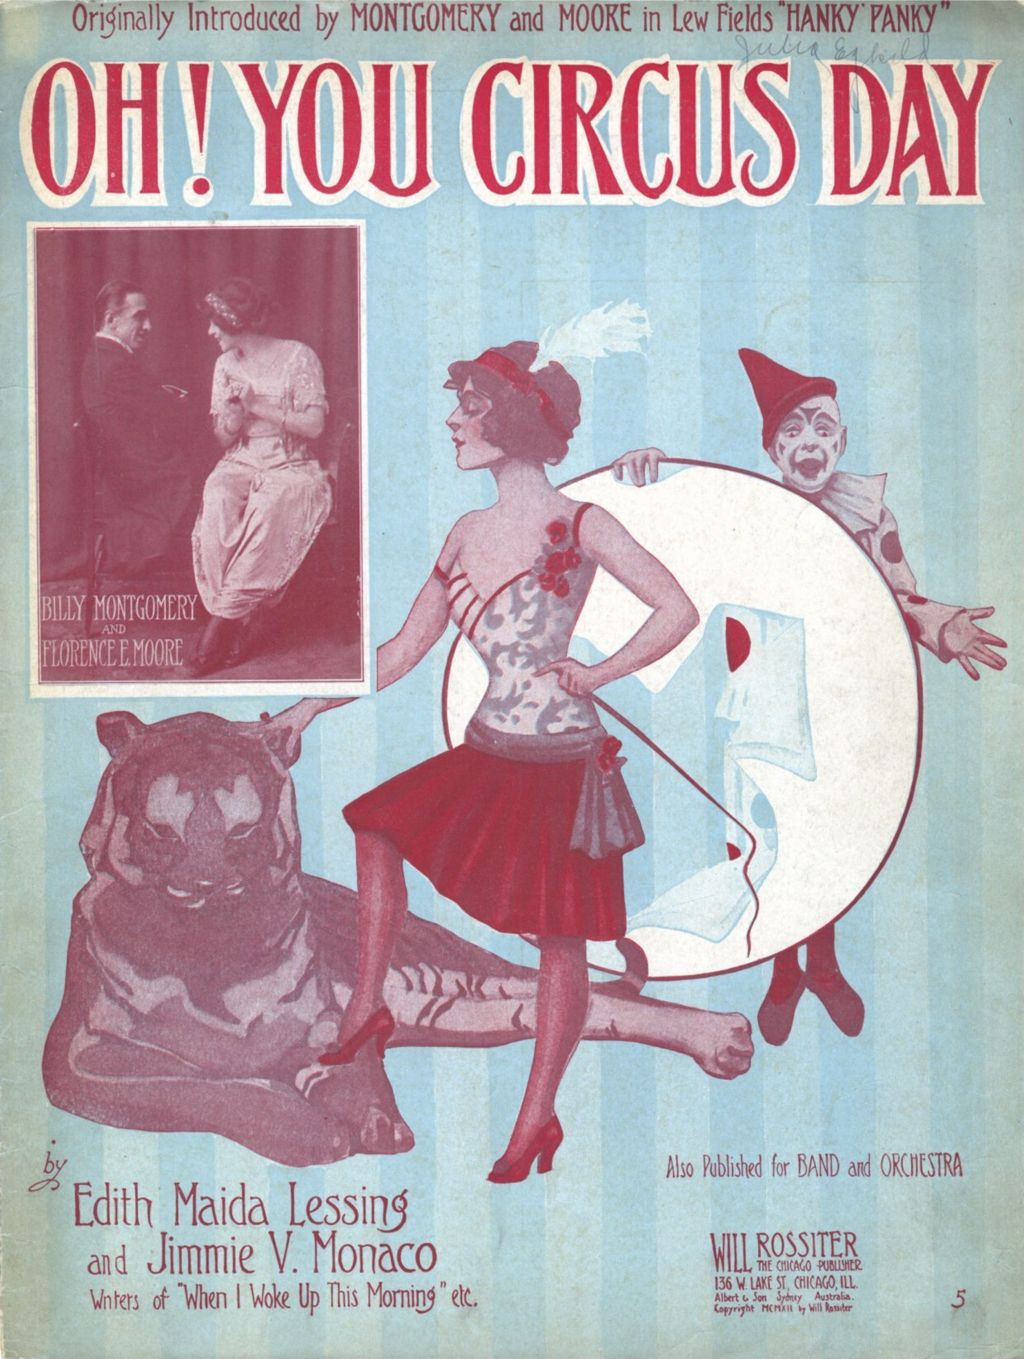 Miniature of Oh! You Circus Day